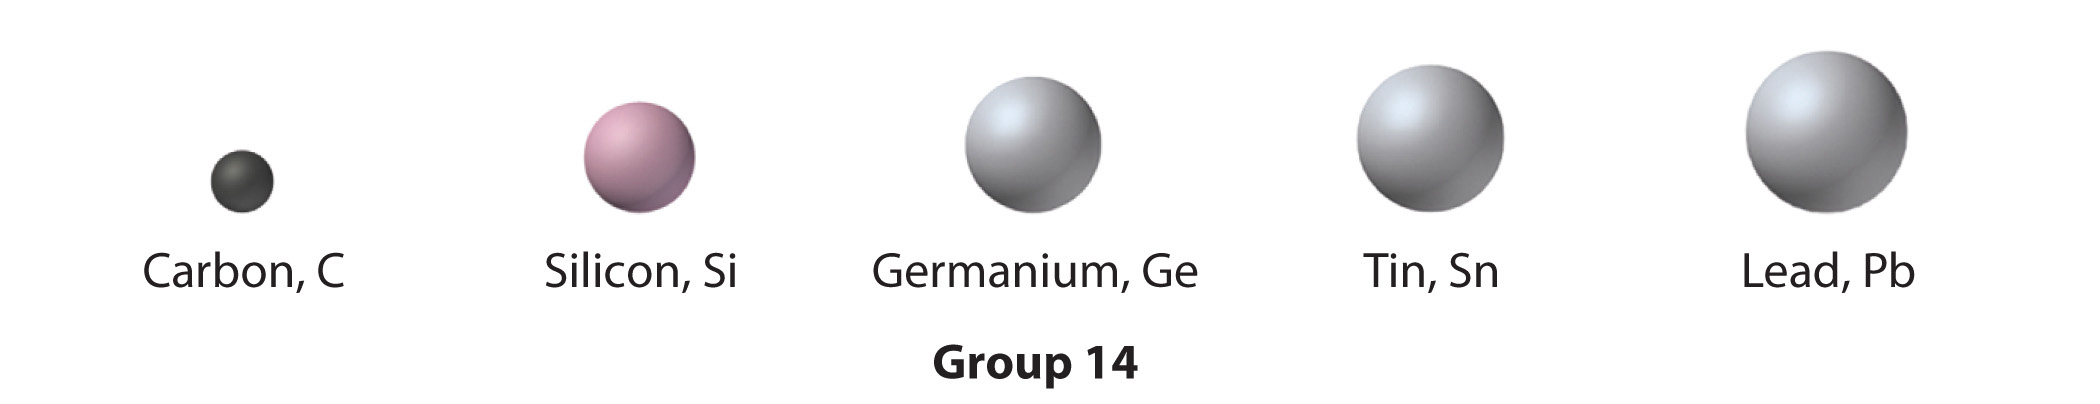 The group 14 elements are shown.